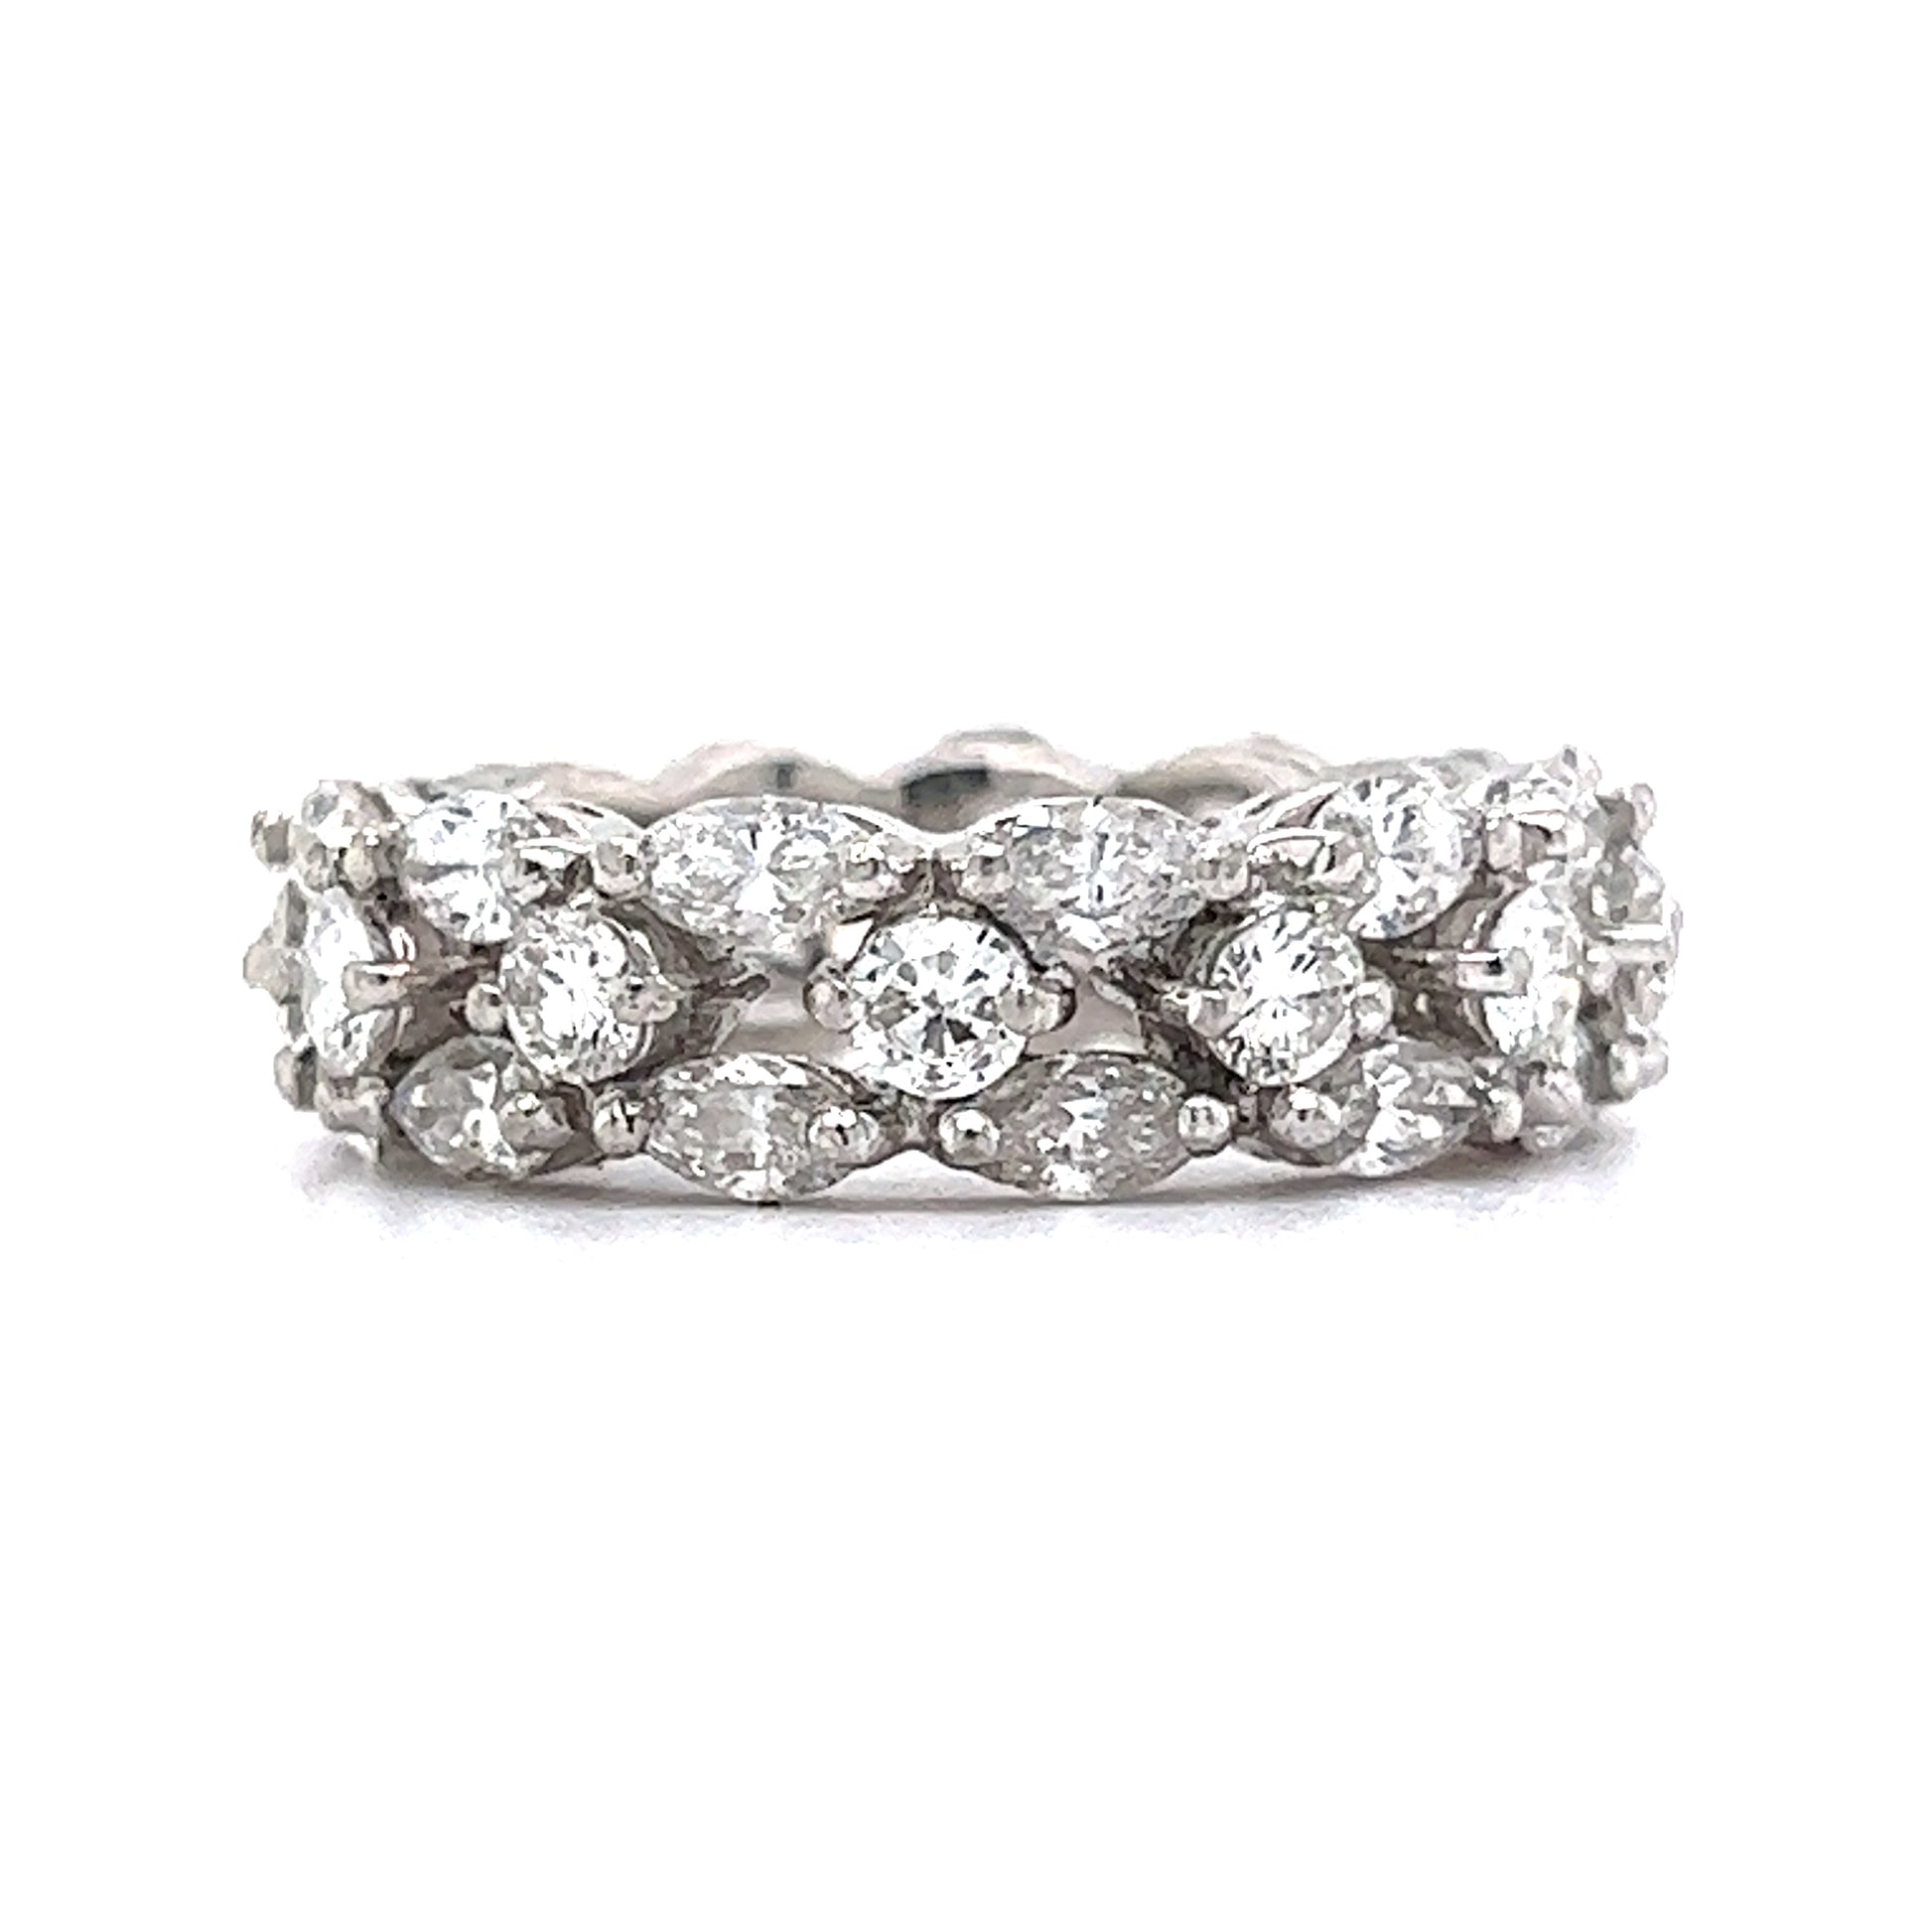 Marquise & Round Diamond Eternity Band in PlatinumComposition: PlatinumRing Size: 6.5Total Diamond Weight: 3.70 ctTotal Gram Weight: 8.3 g